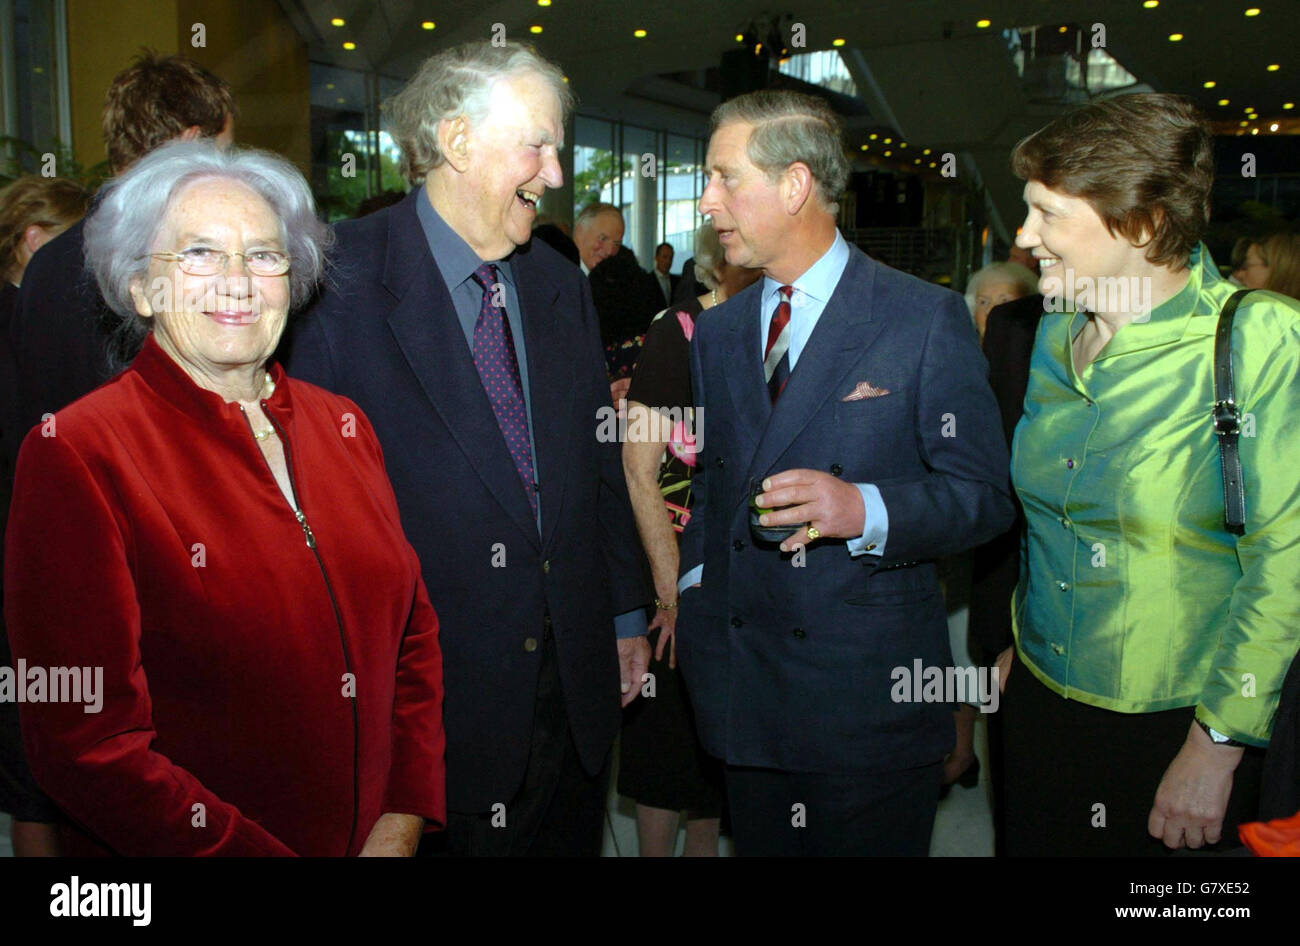 The Prince of Wales enjoys a chat with Sir Edmund Hillary the first man to climb Mount Everest, with Lady Hillary (left) and Helen Clark the New Zealand Prime Minister at the Aotea Centre reception. Stock Photo